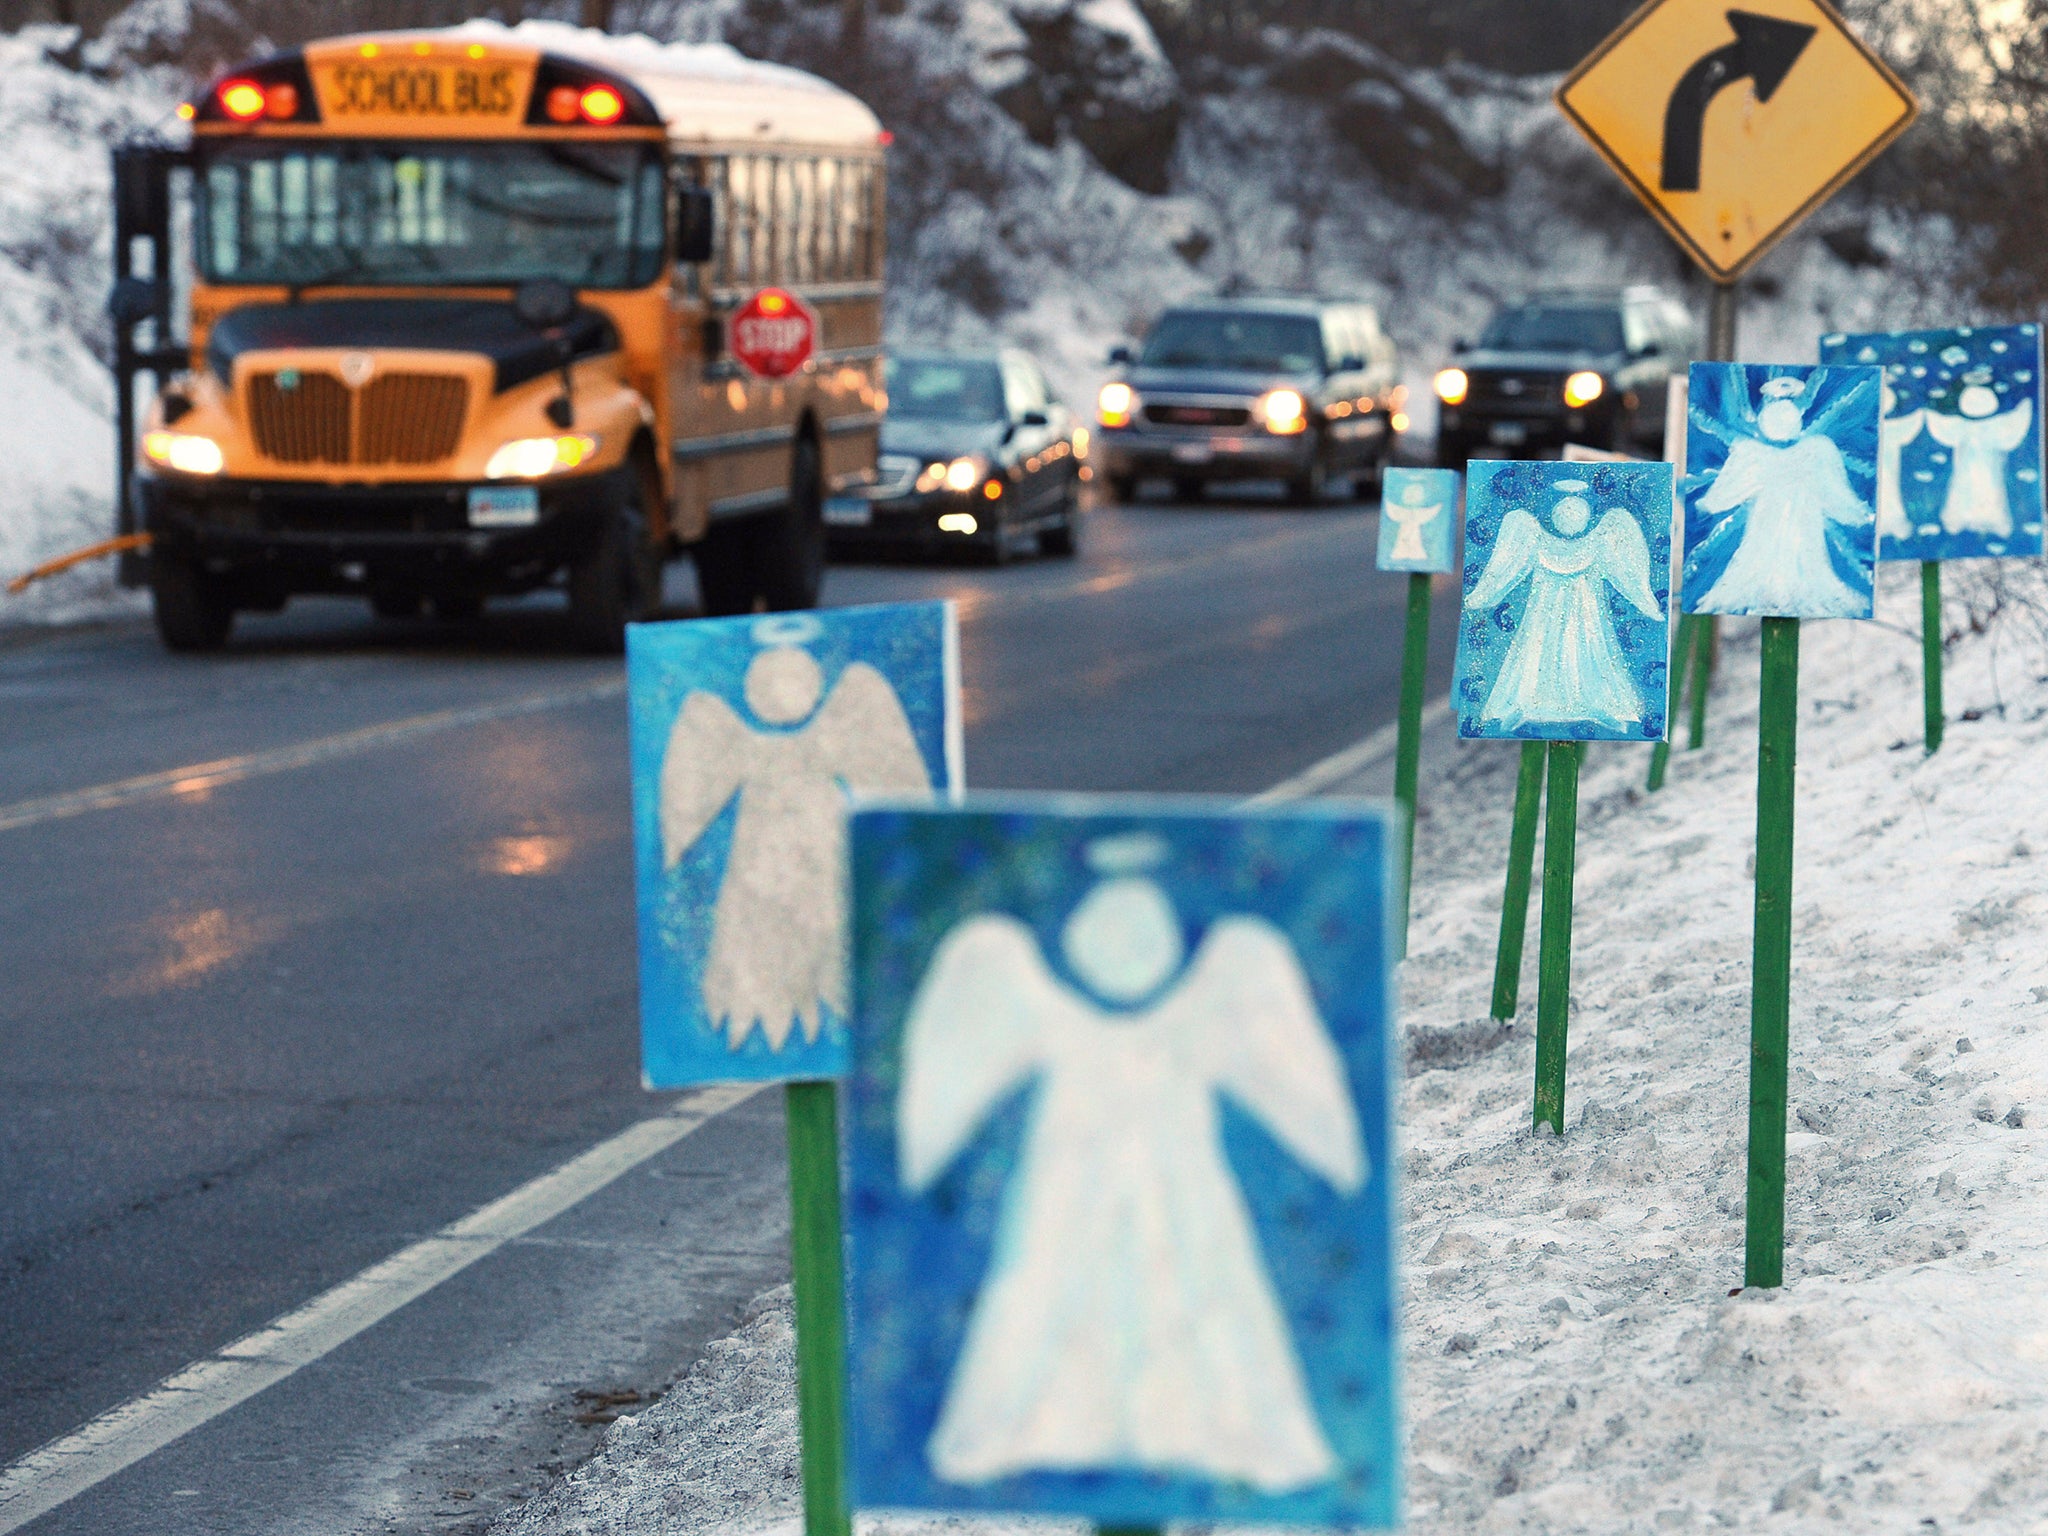 A bus traveling from Newtown to Monroe stops in front of 26 angels along the roadside on the first day of classes for Sandy Hook Elementary School students since the Dec. 14, 2012 shooting.